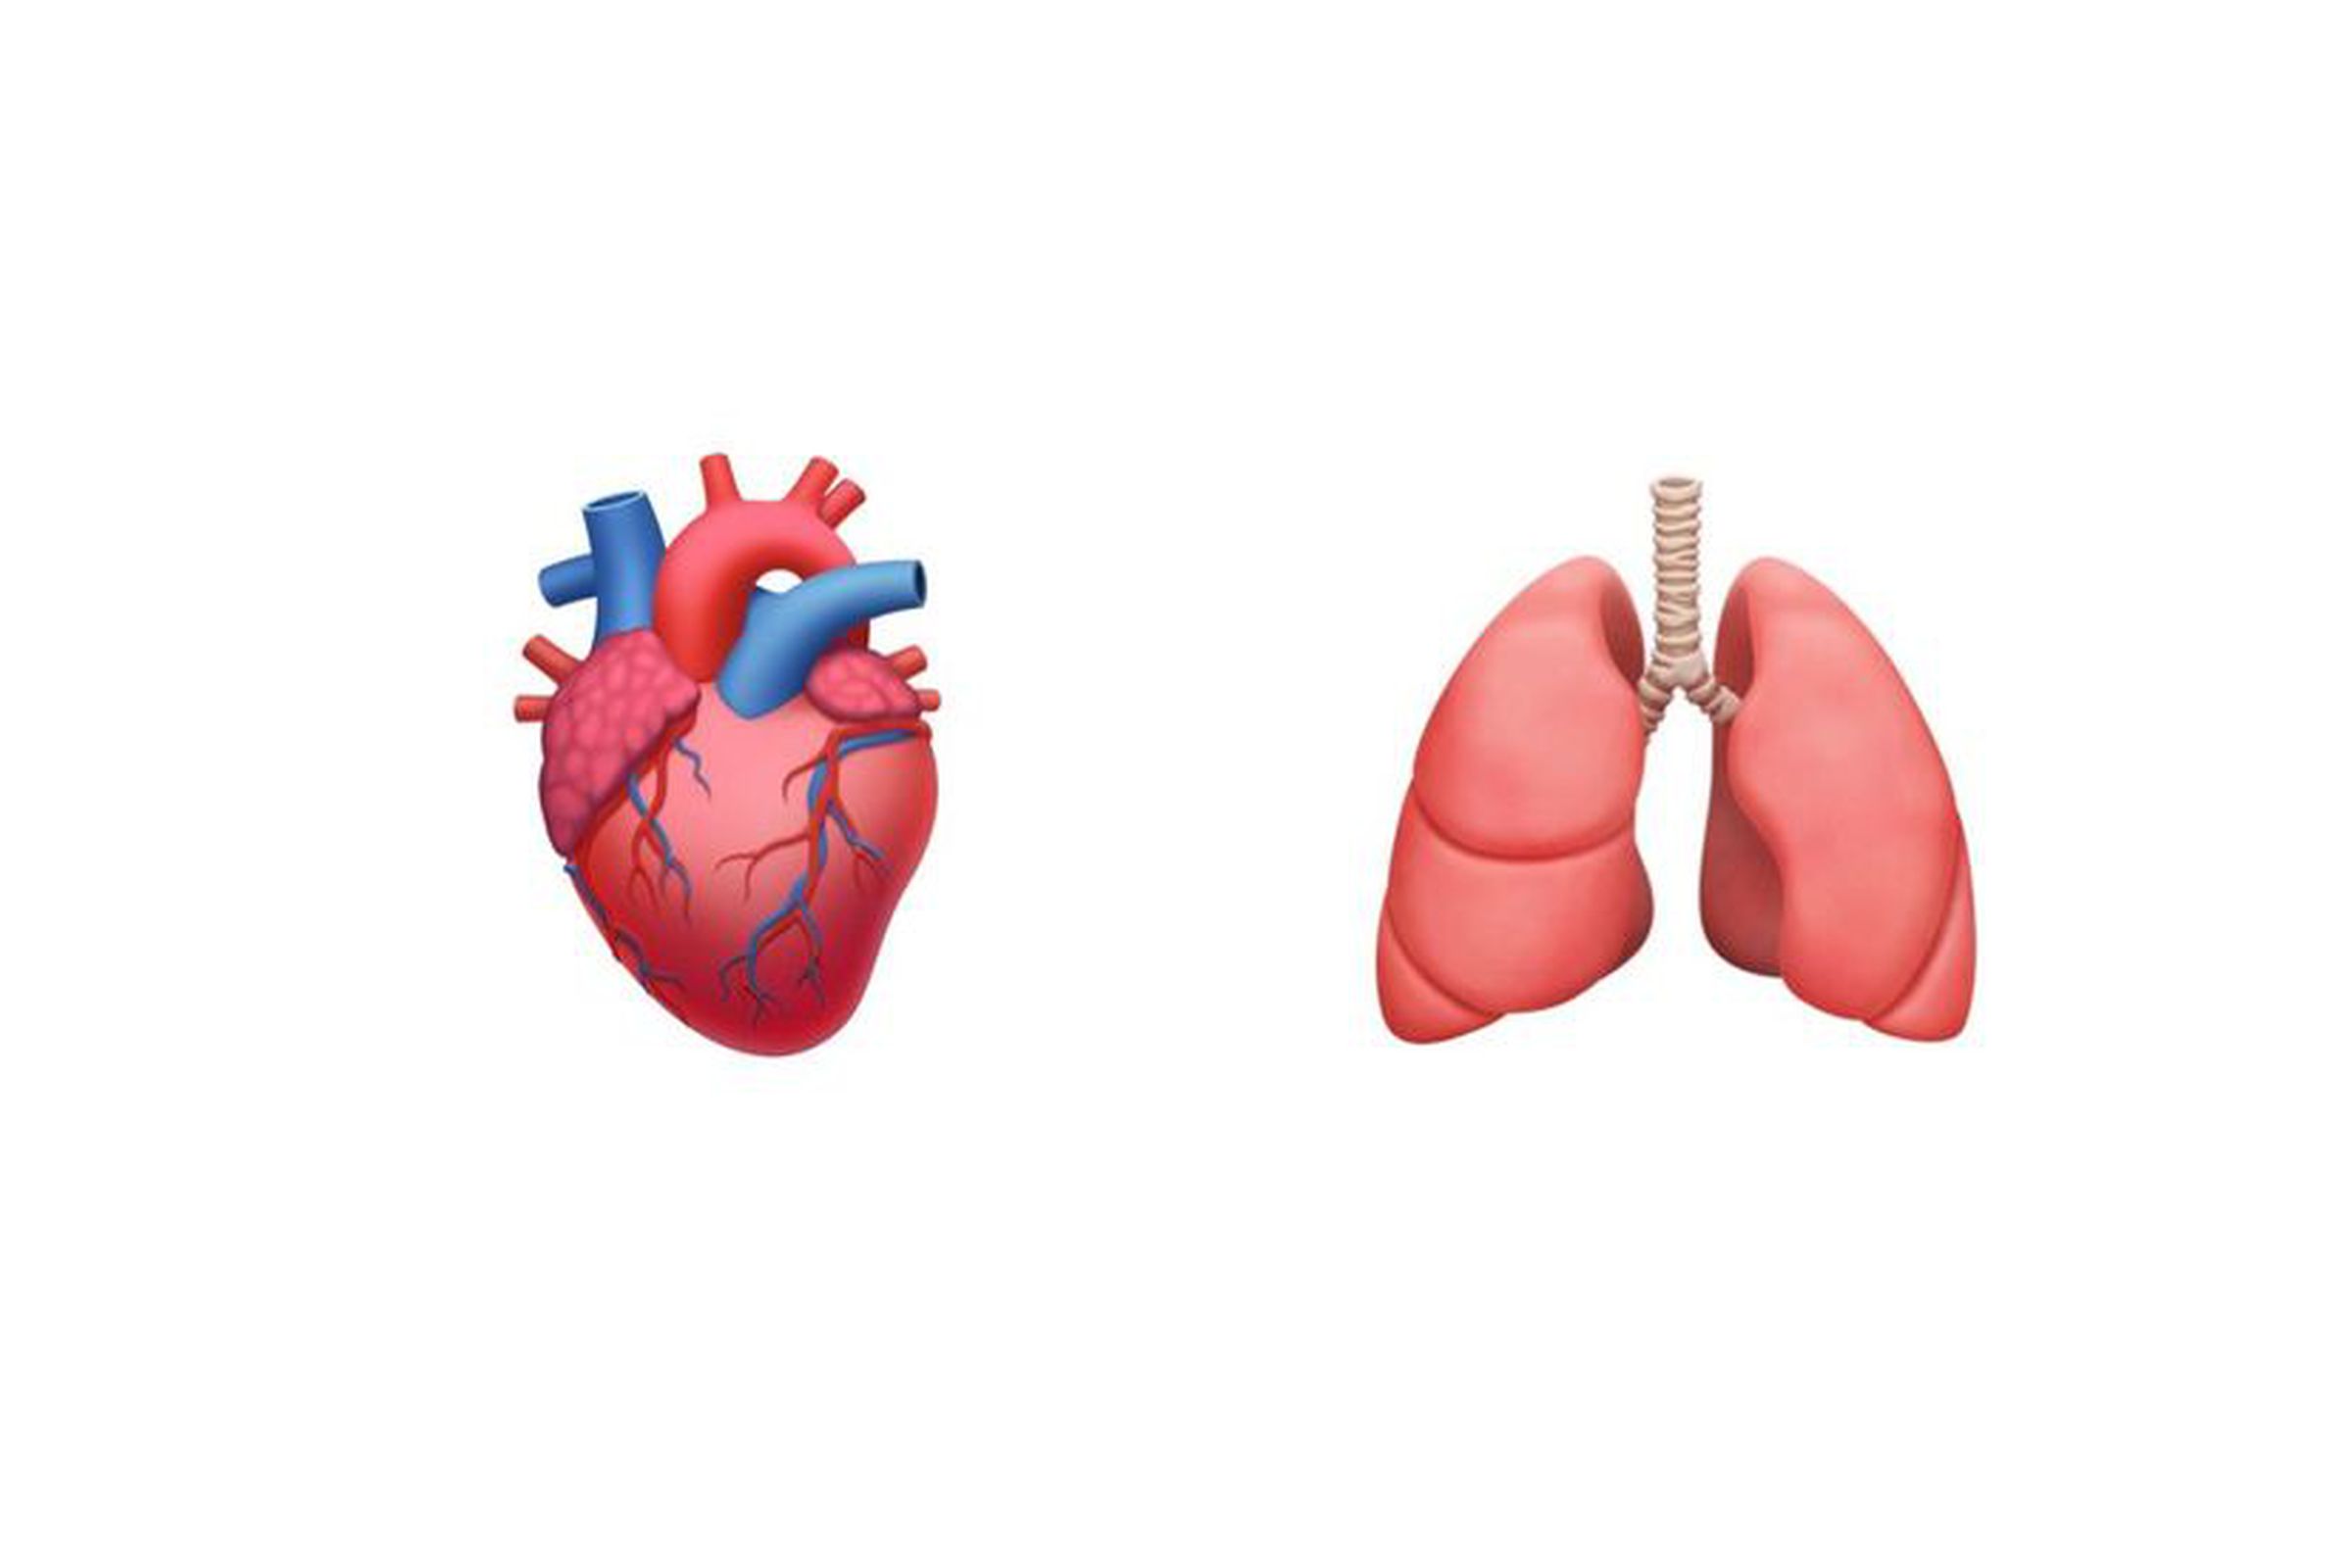 Emoji for the anatomical heart on the left and the lungs on the right, on a white background.